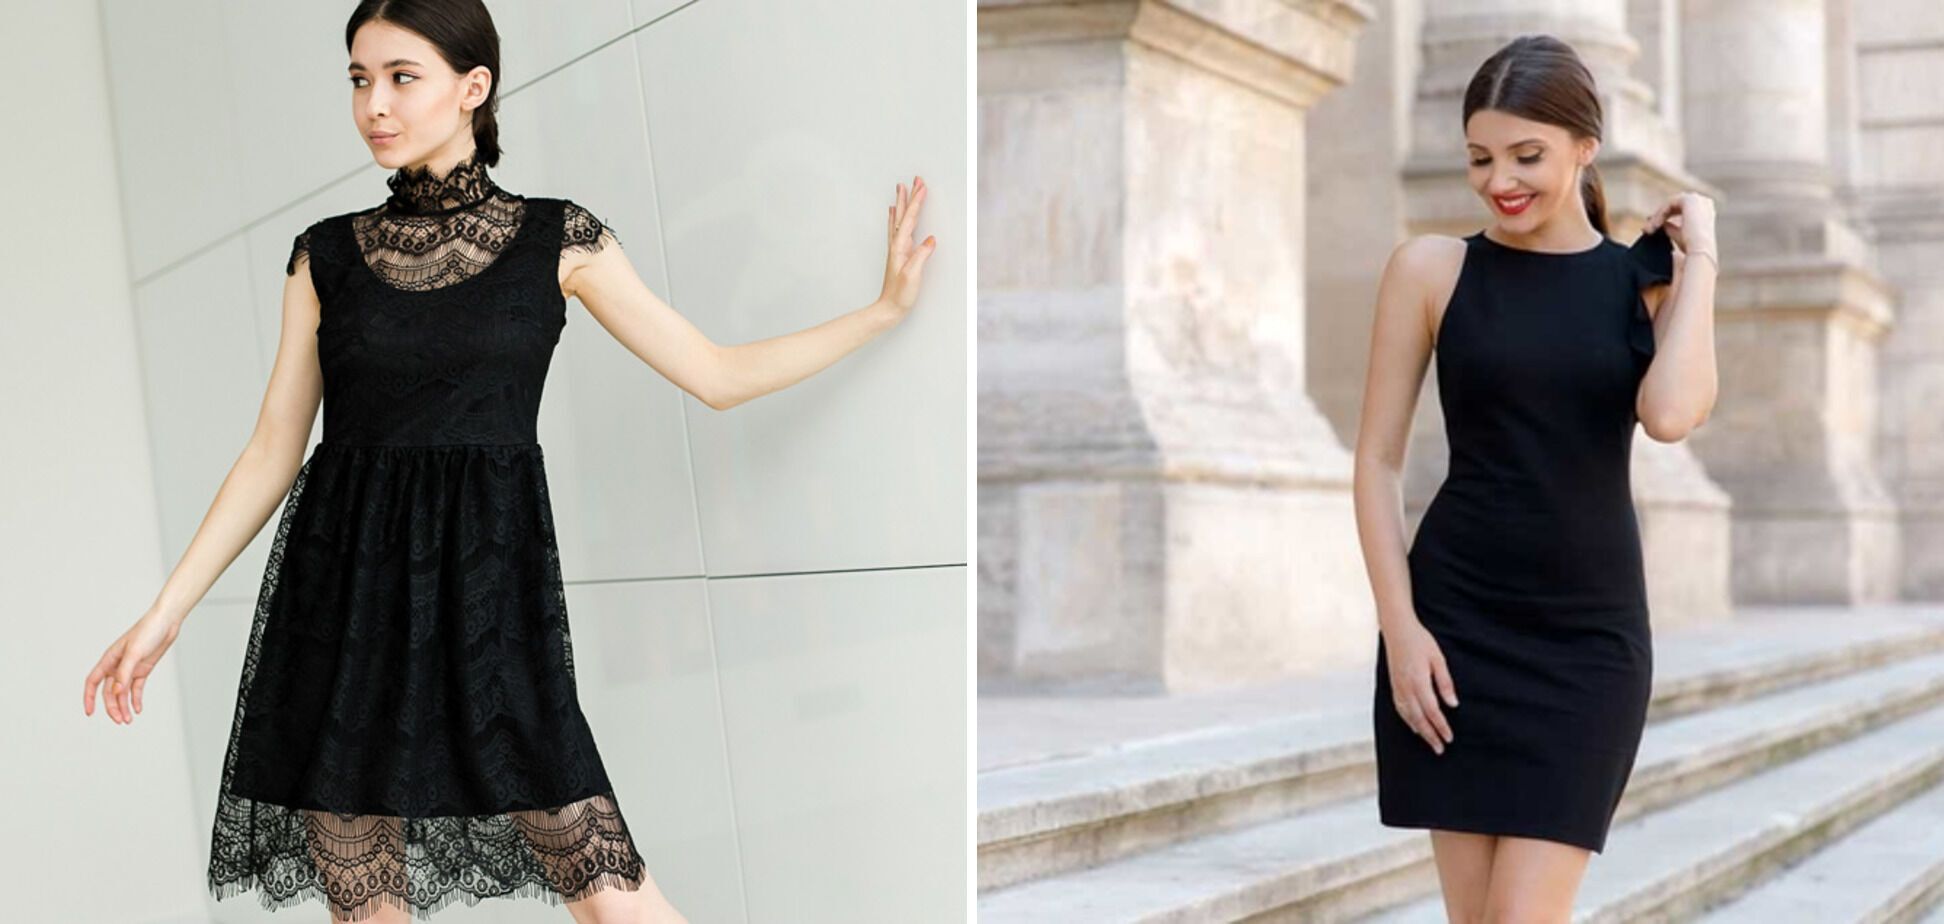 2. The Little Black Dress as Wardrobe Staple, 5 Things Coco Chanel Taught  Us About Style